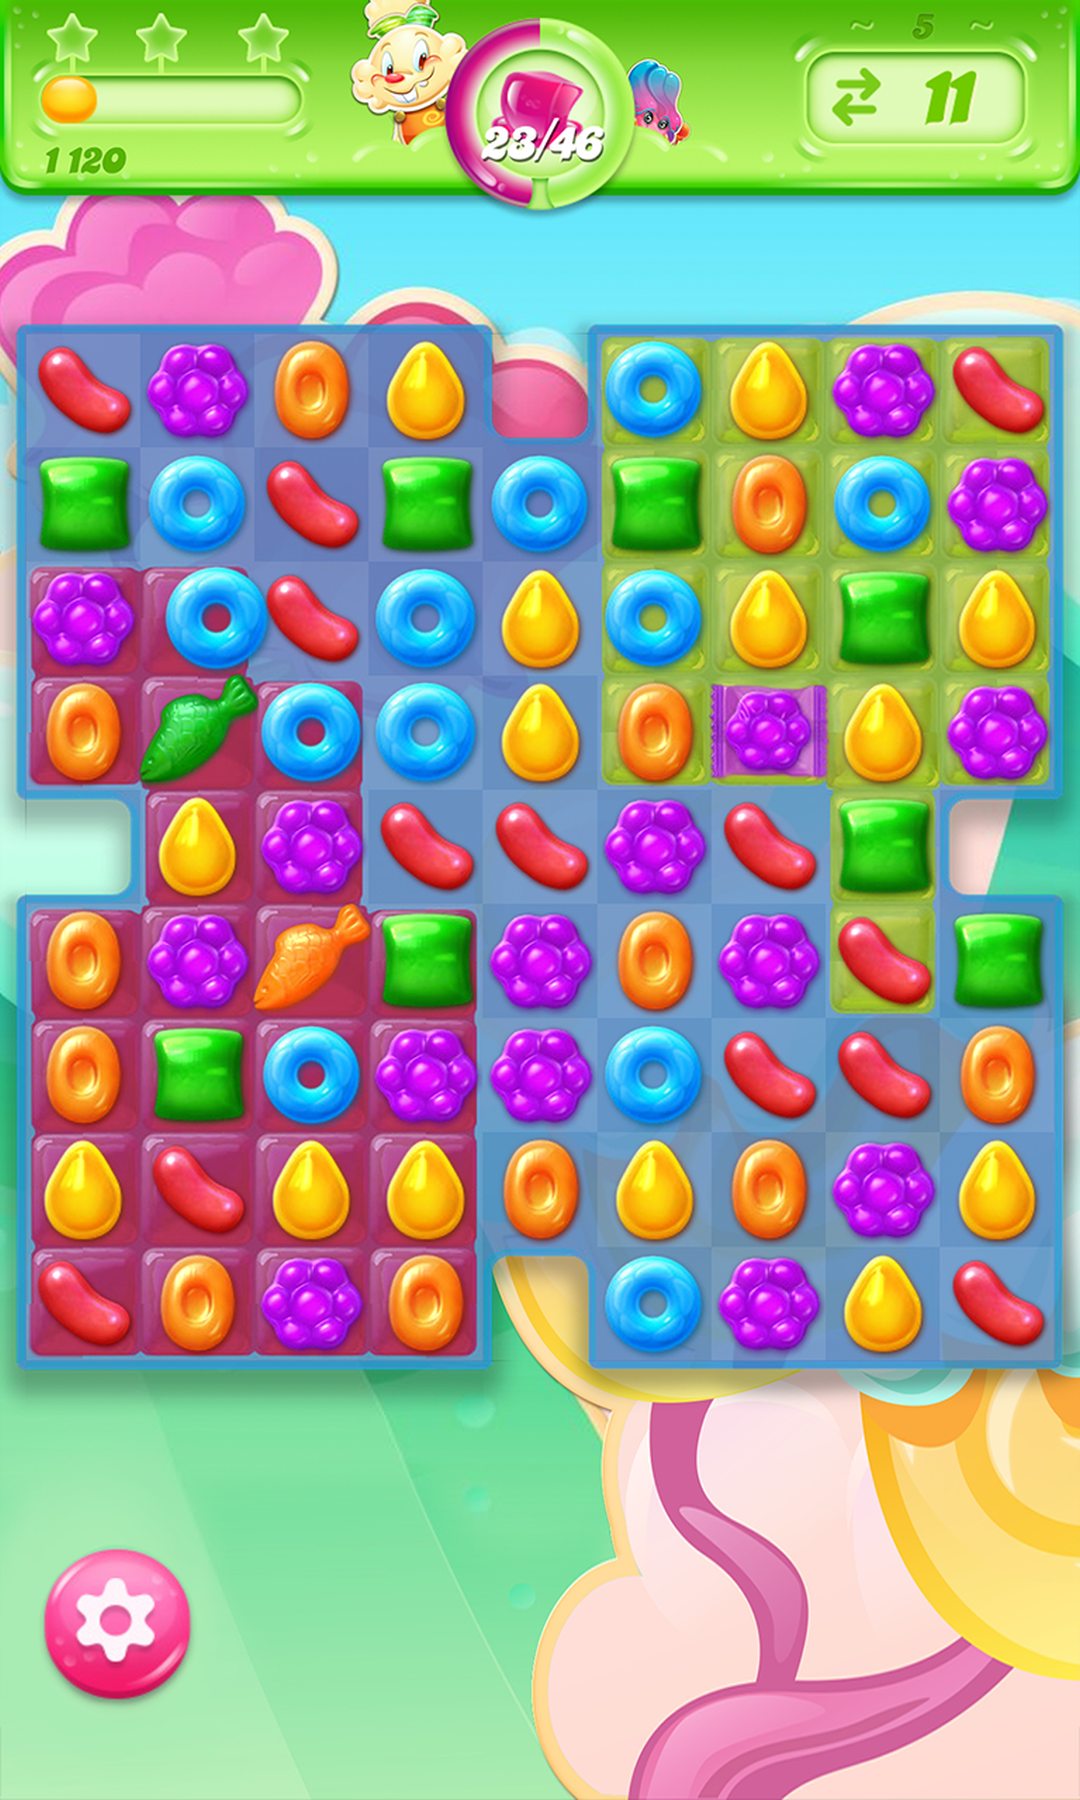 Candy Crush Jelly Saga APK + Mod 2.55.55 - Download Free for Android